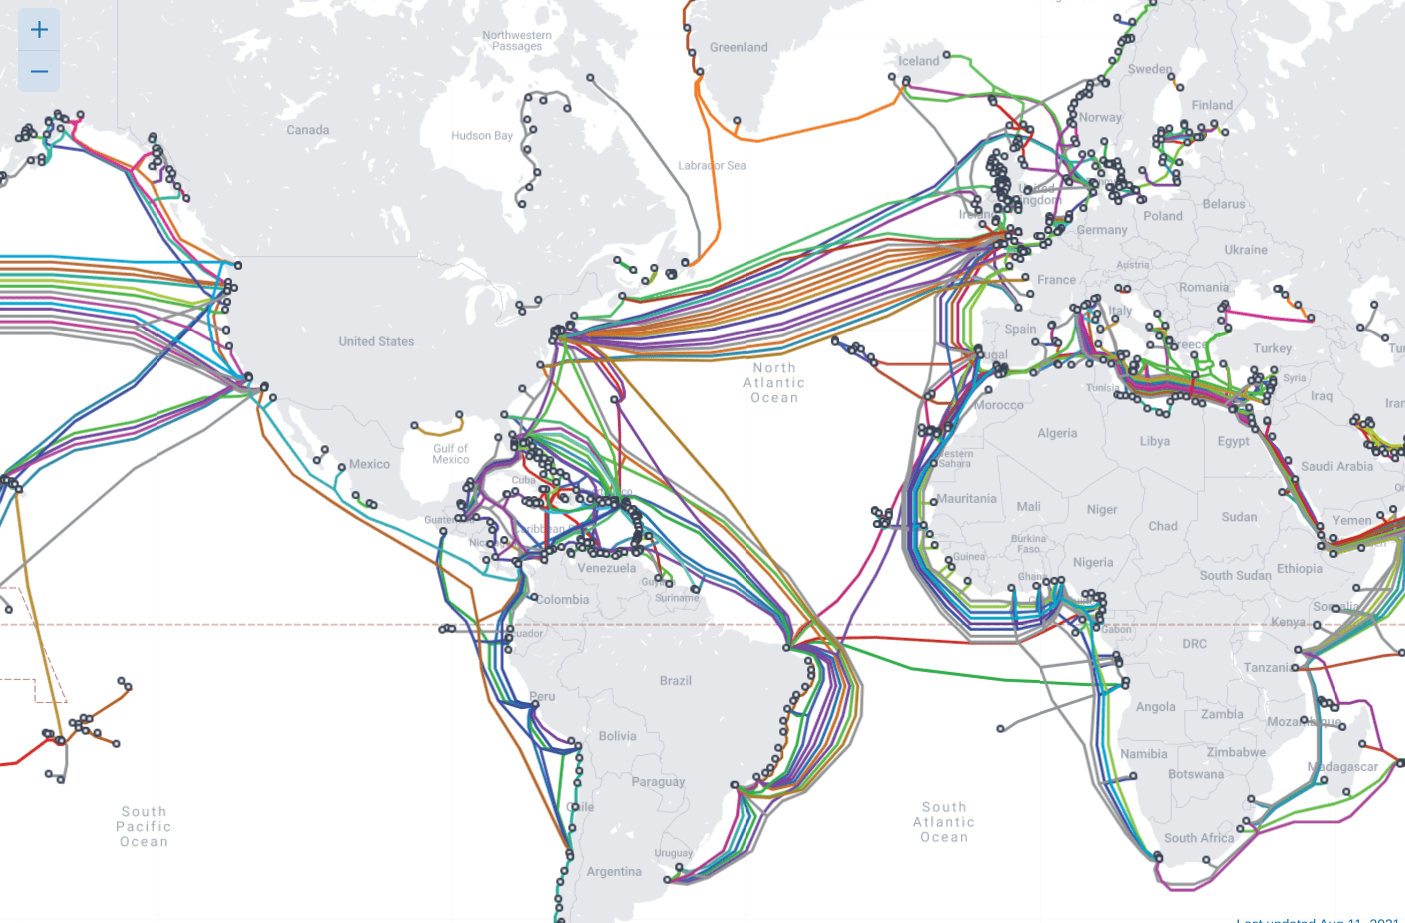 One (or more) of 426 Submarine Cables  enabled you to read this post